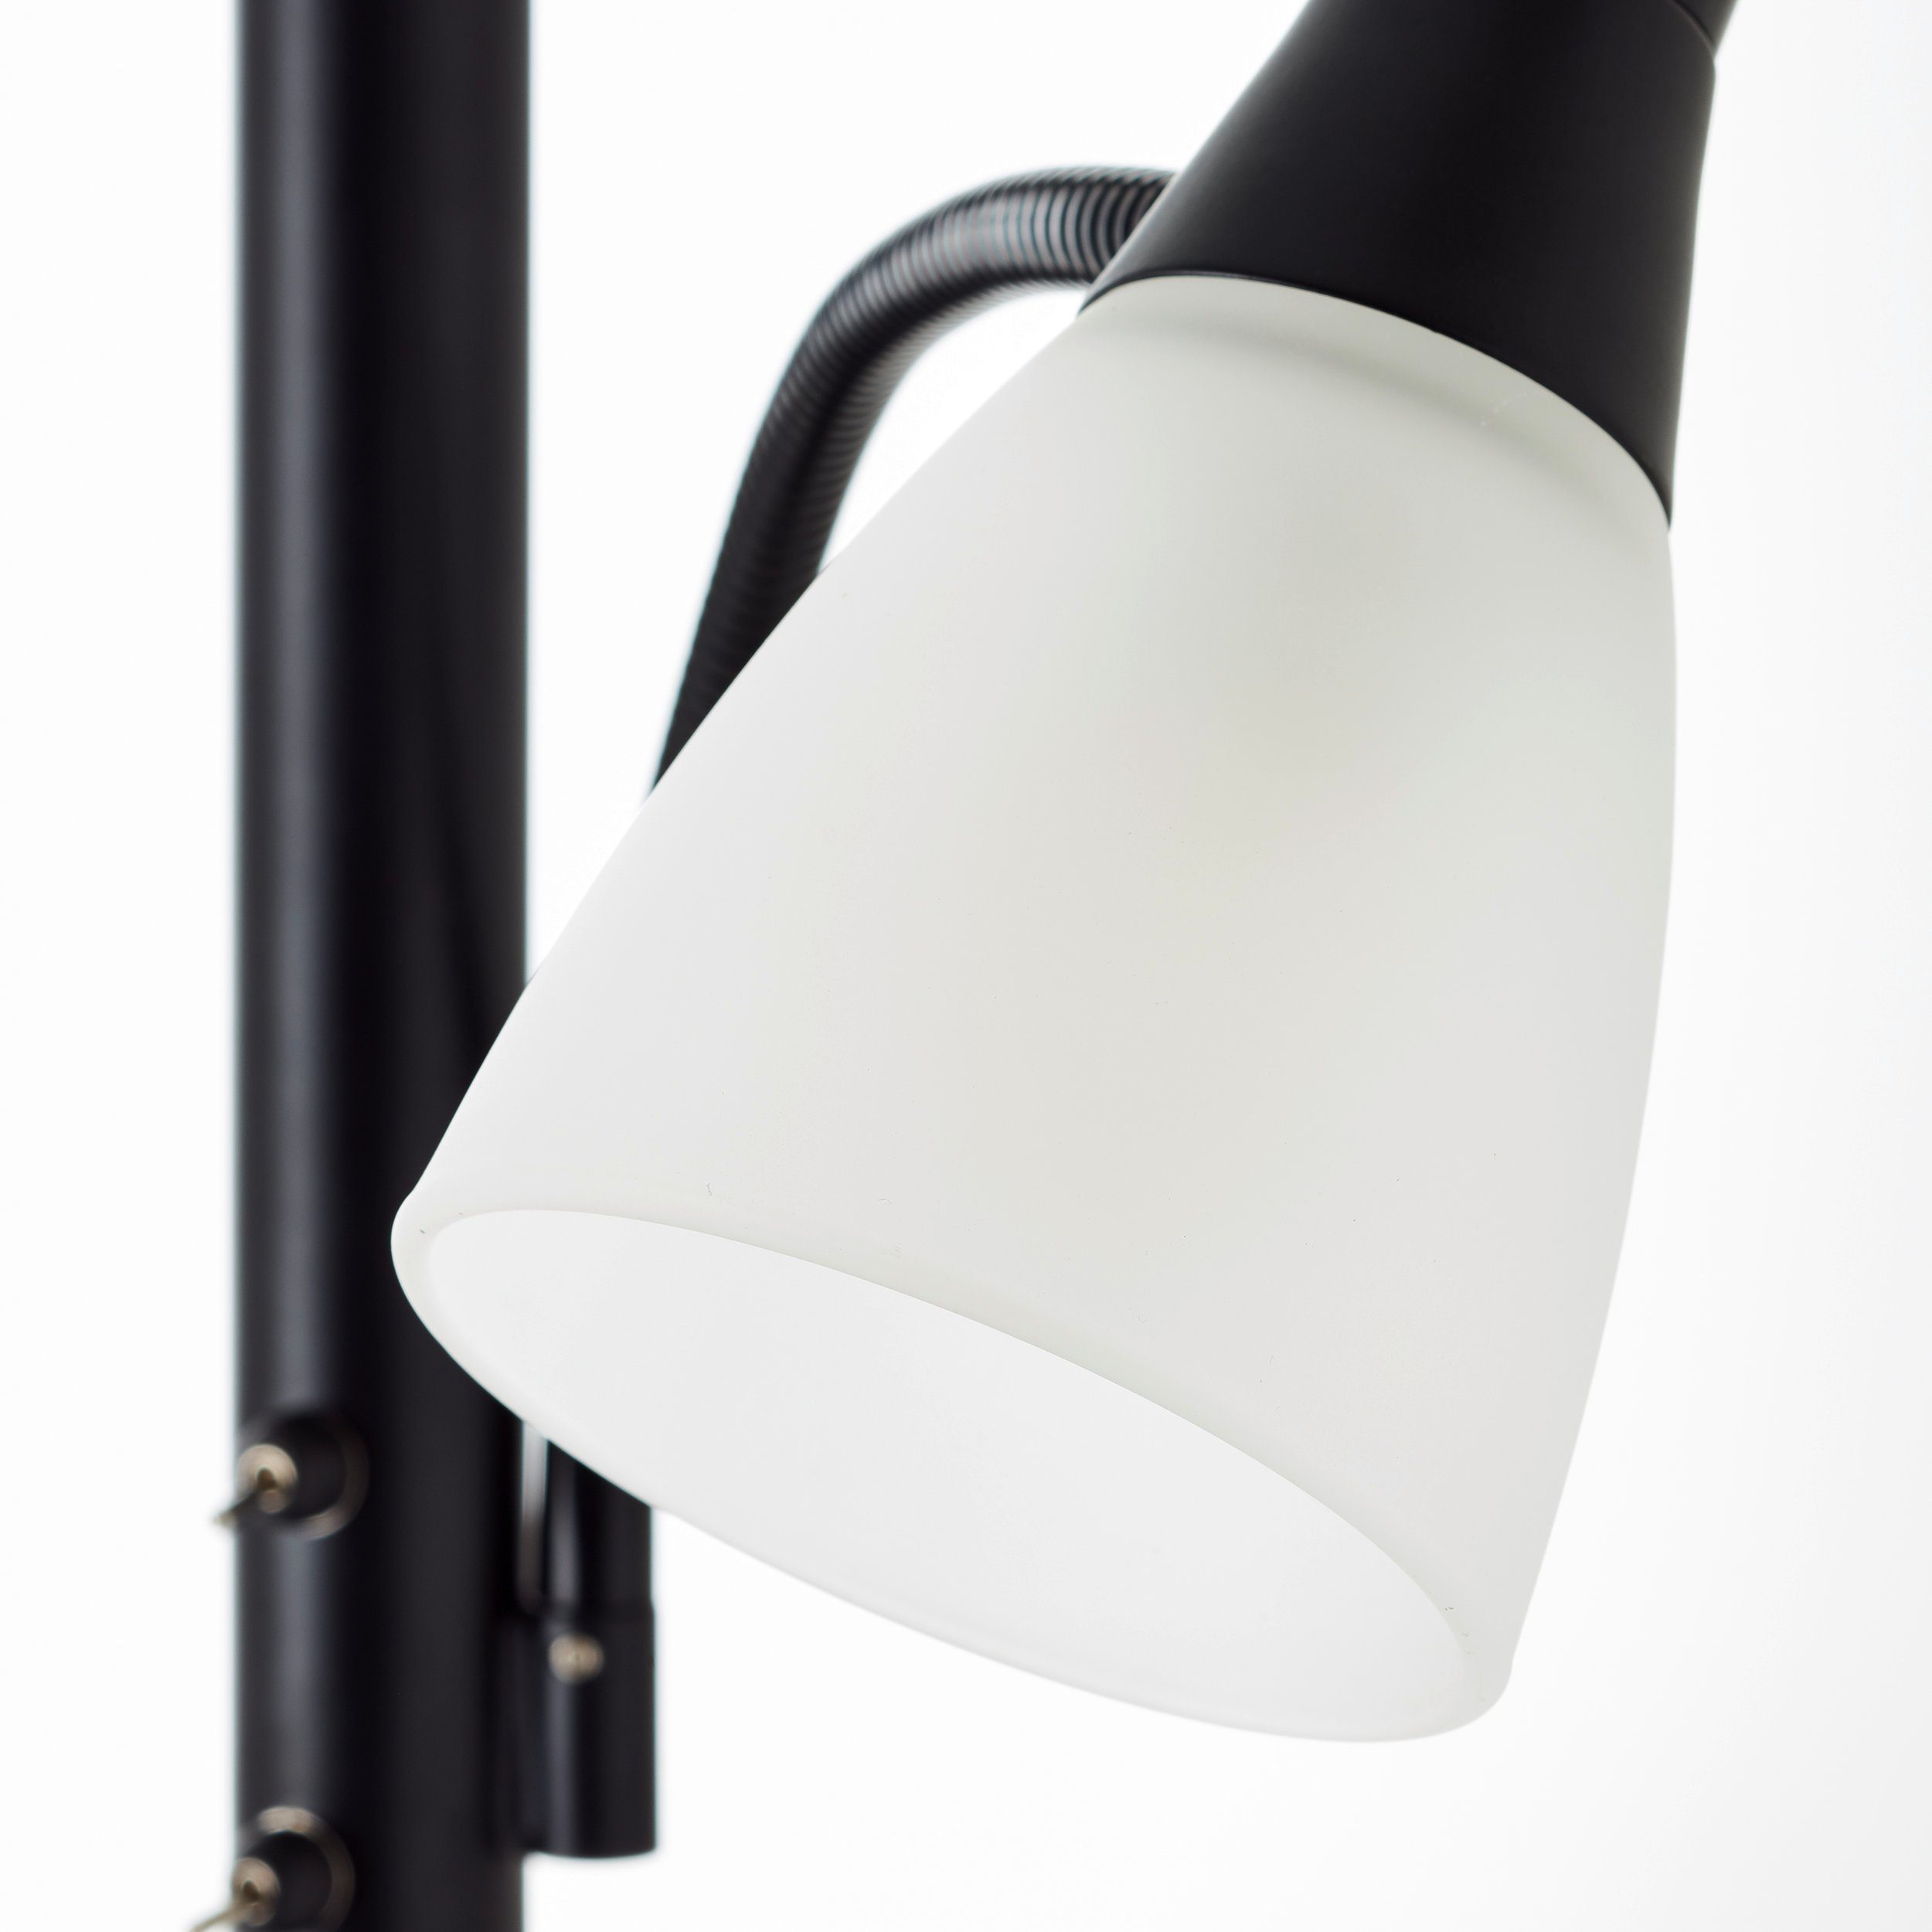 Brilliant Stehlampe Lucy, Lucy 5 Lesearm schwarz, Metall/Glas, A60, W LED Deckenfluter 1x E27